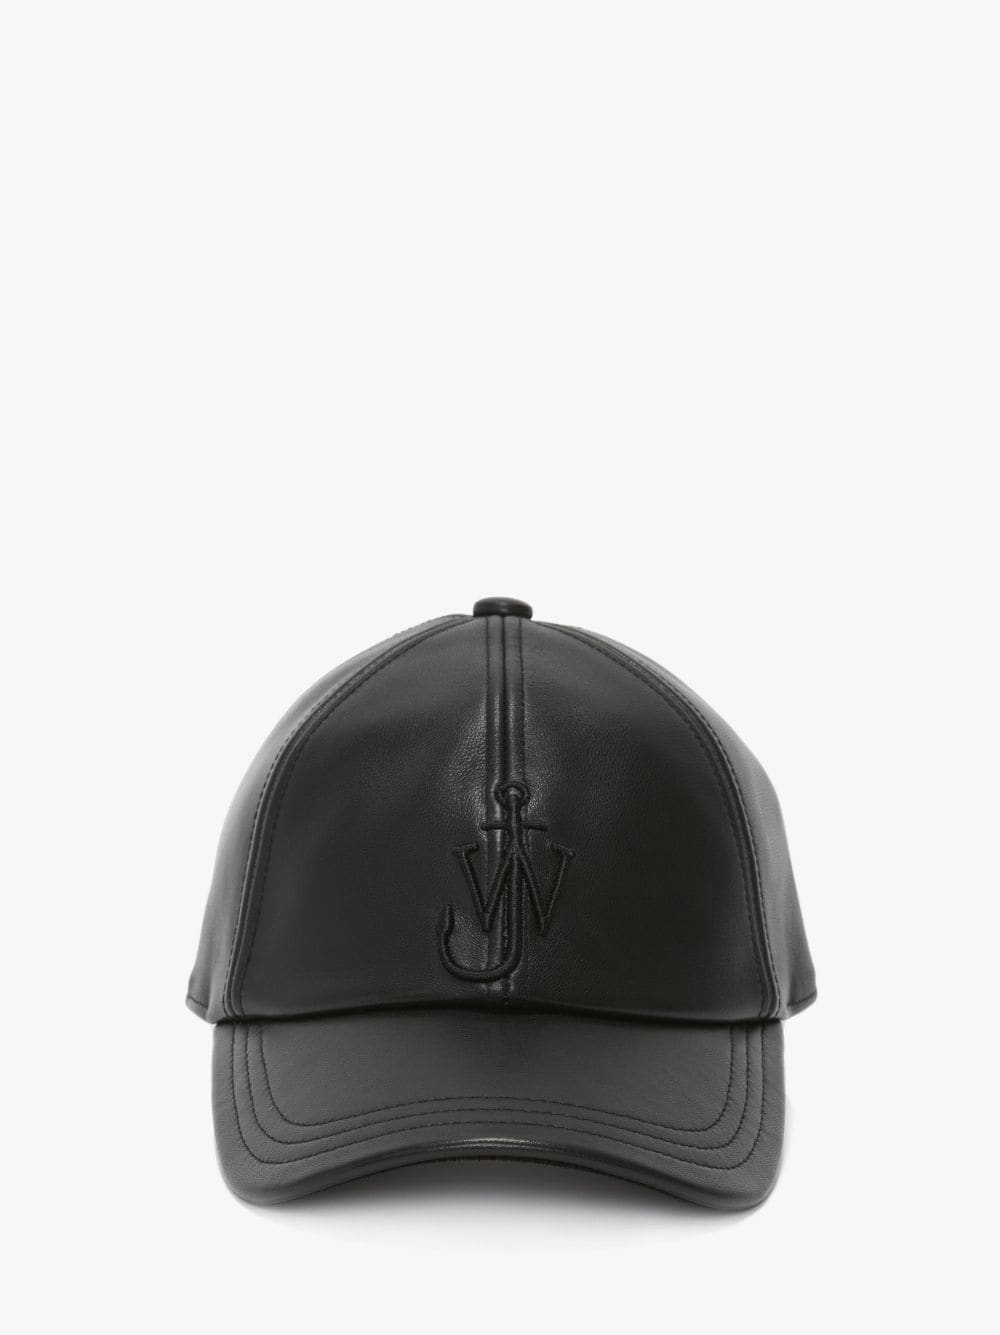 LEATHER BASEBALL CAP WITH ANCHOR LOGO in black | JW Anderson US